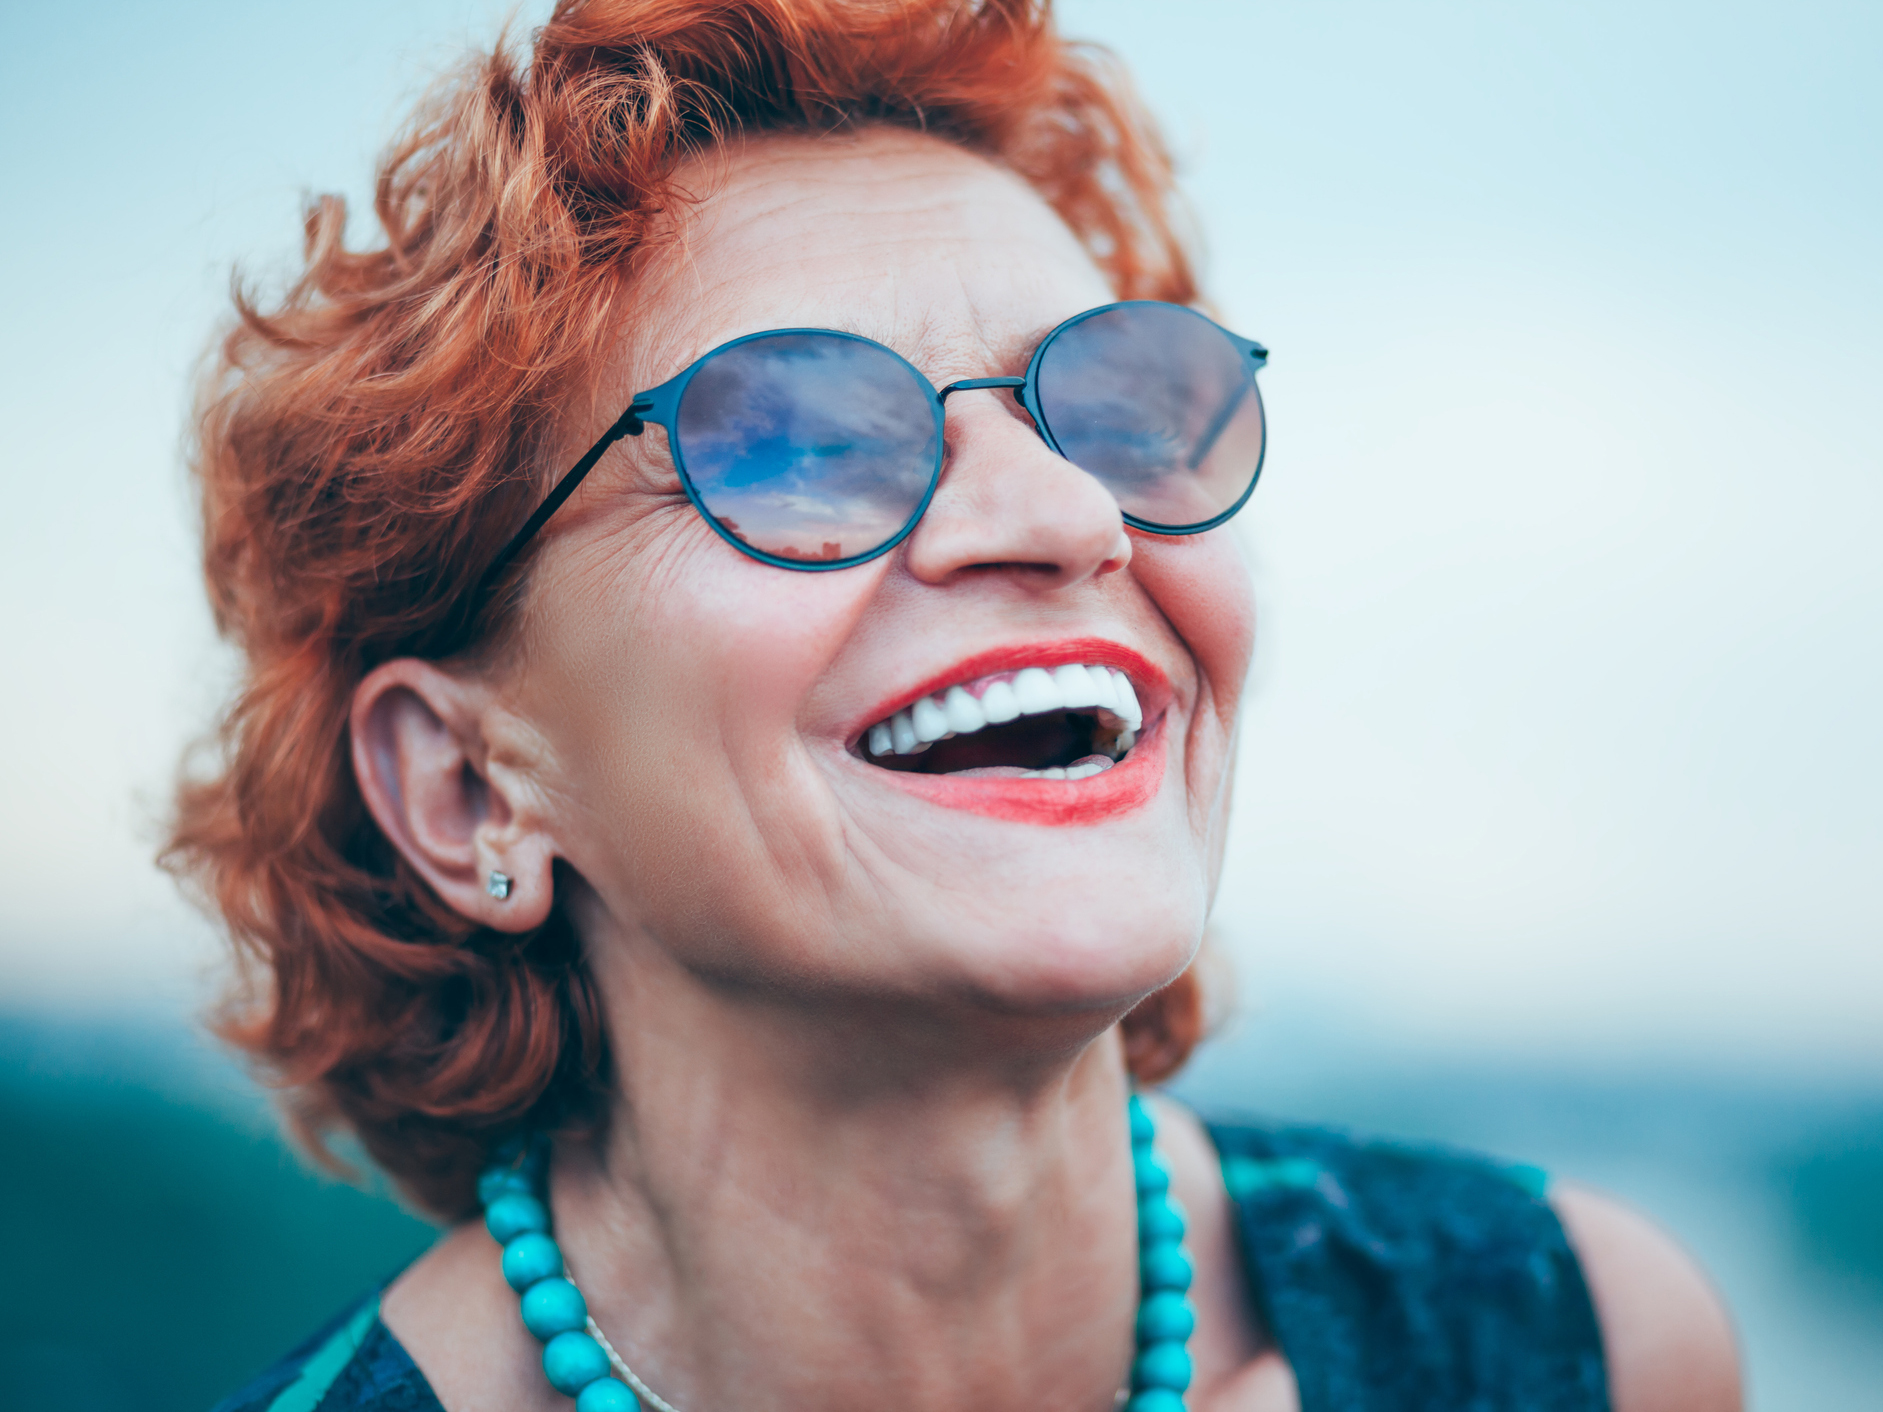 The best anti-aging medicine is ONE simple thing you can do today